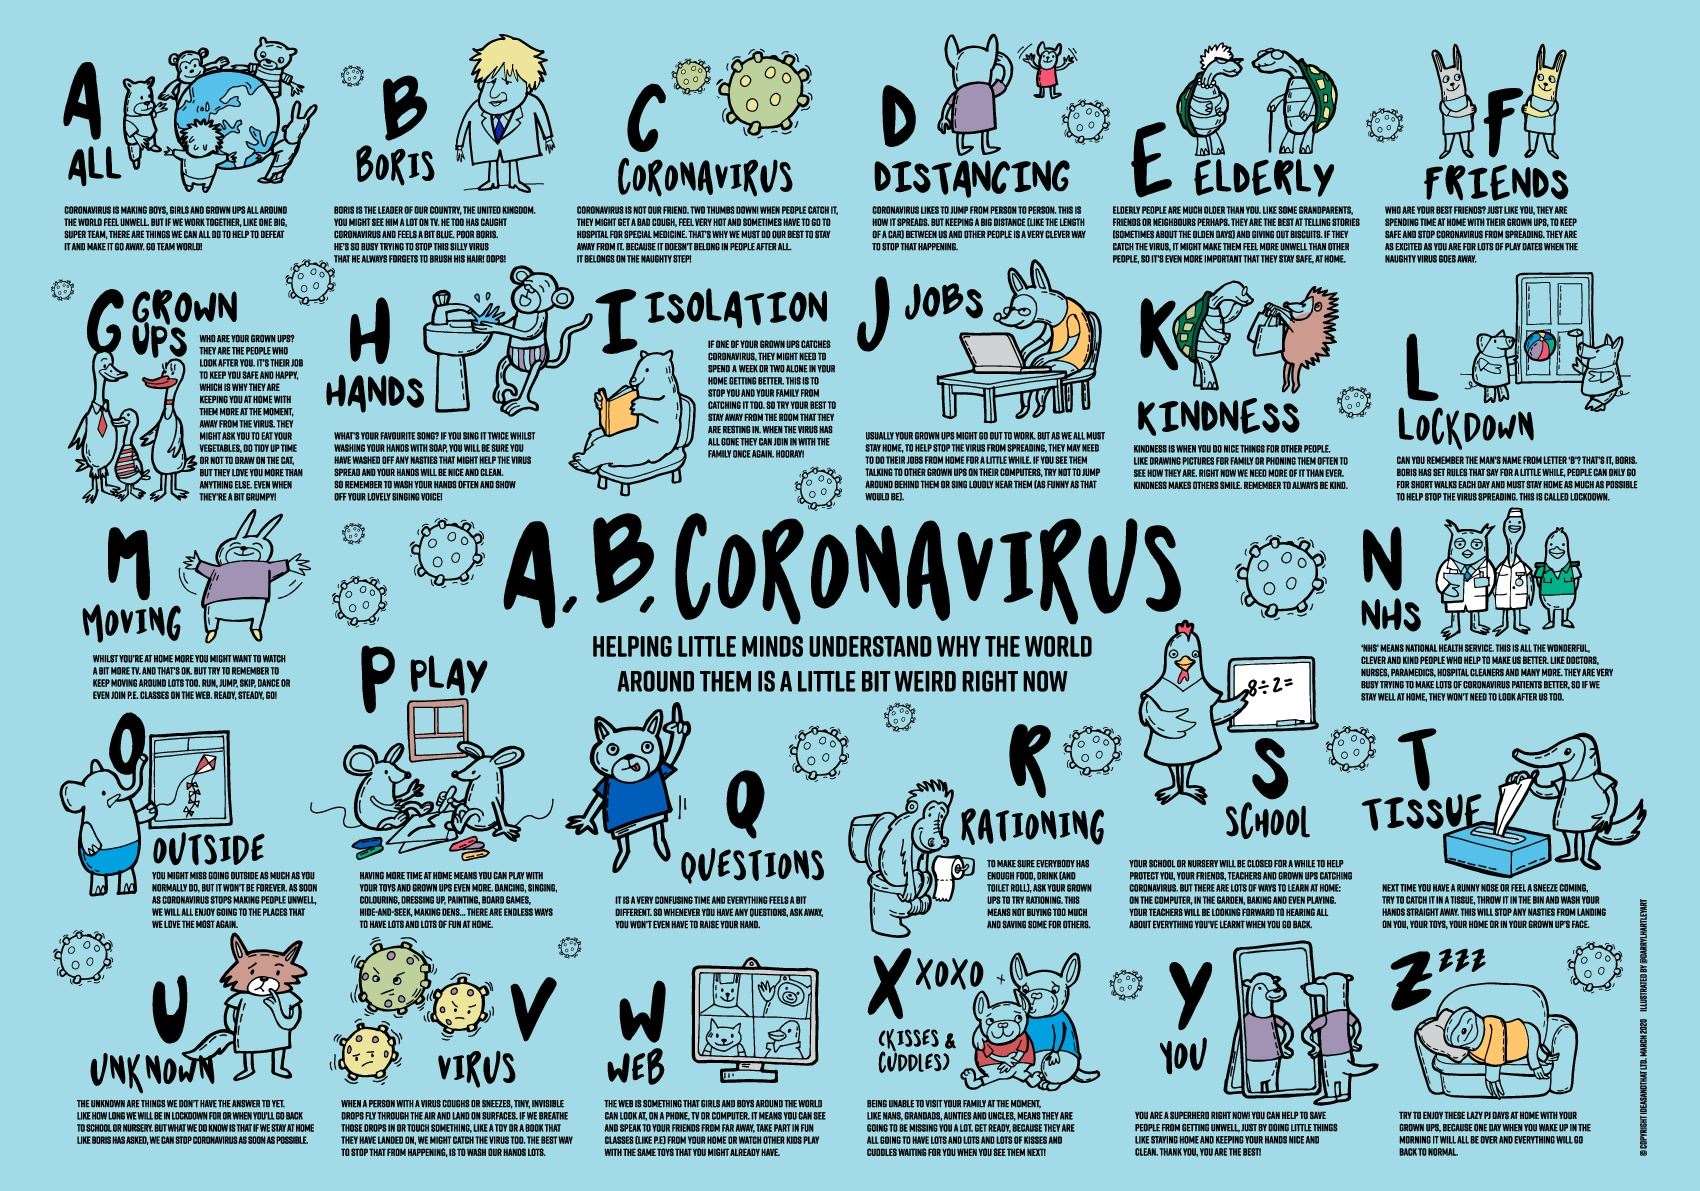 The A to Z of coronavirus for children has been designed by an agency in Sittingbourne